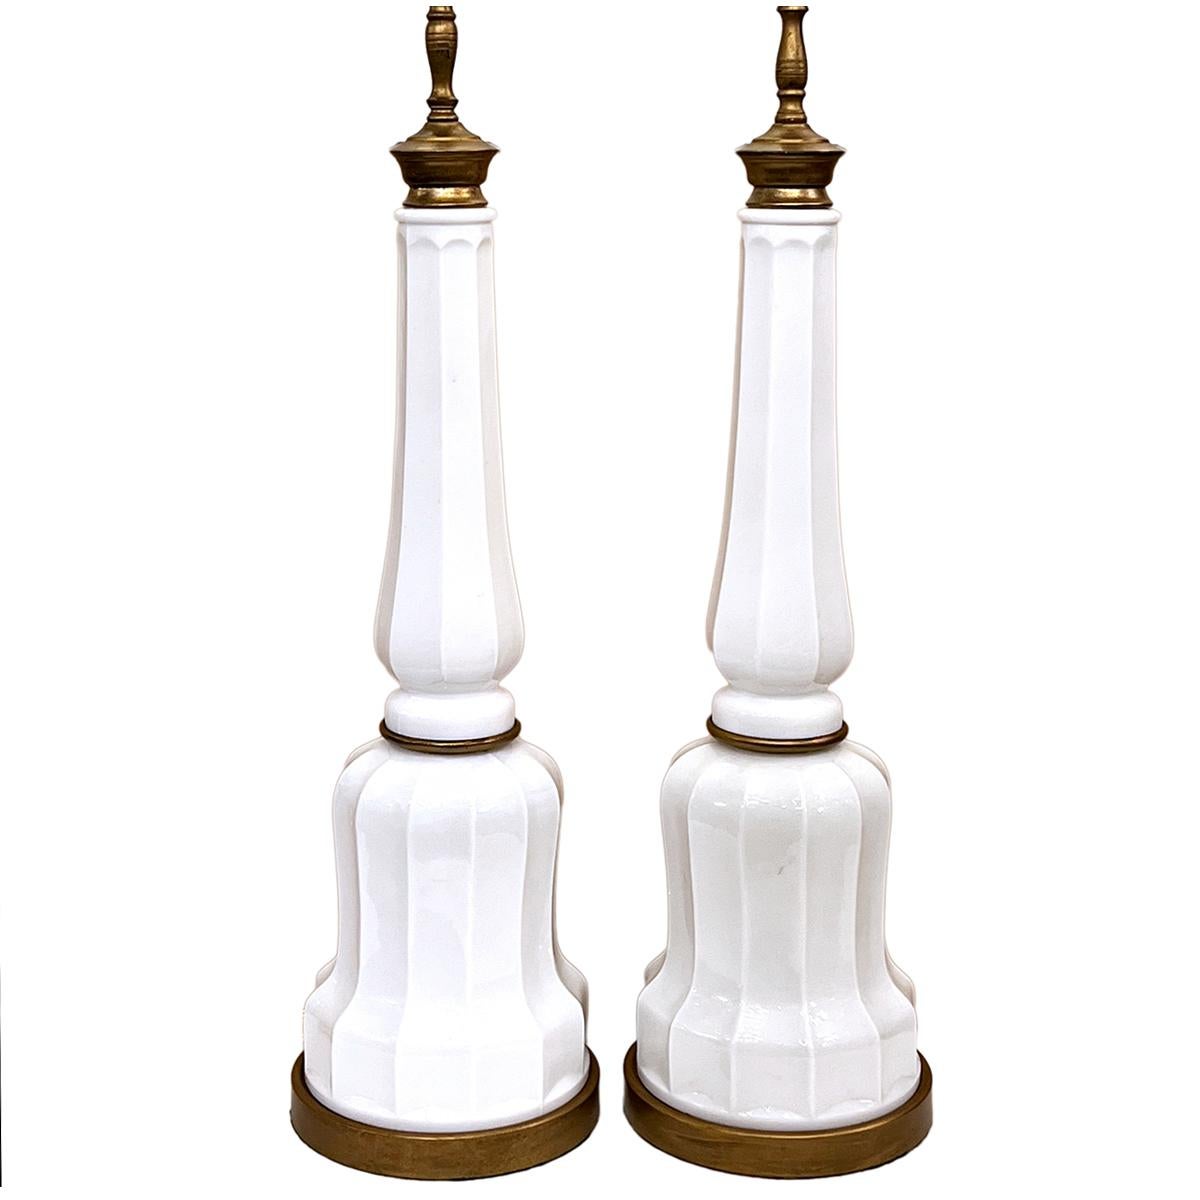 Pair of circa 1920's English milk glass table lamps.

Measurements:
Height of body: 25